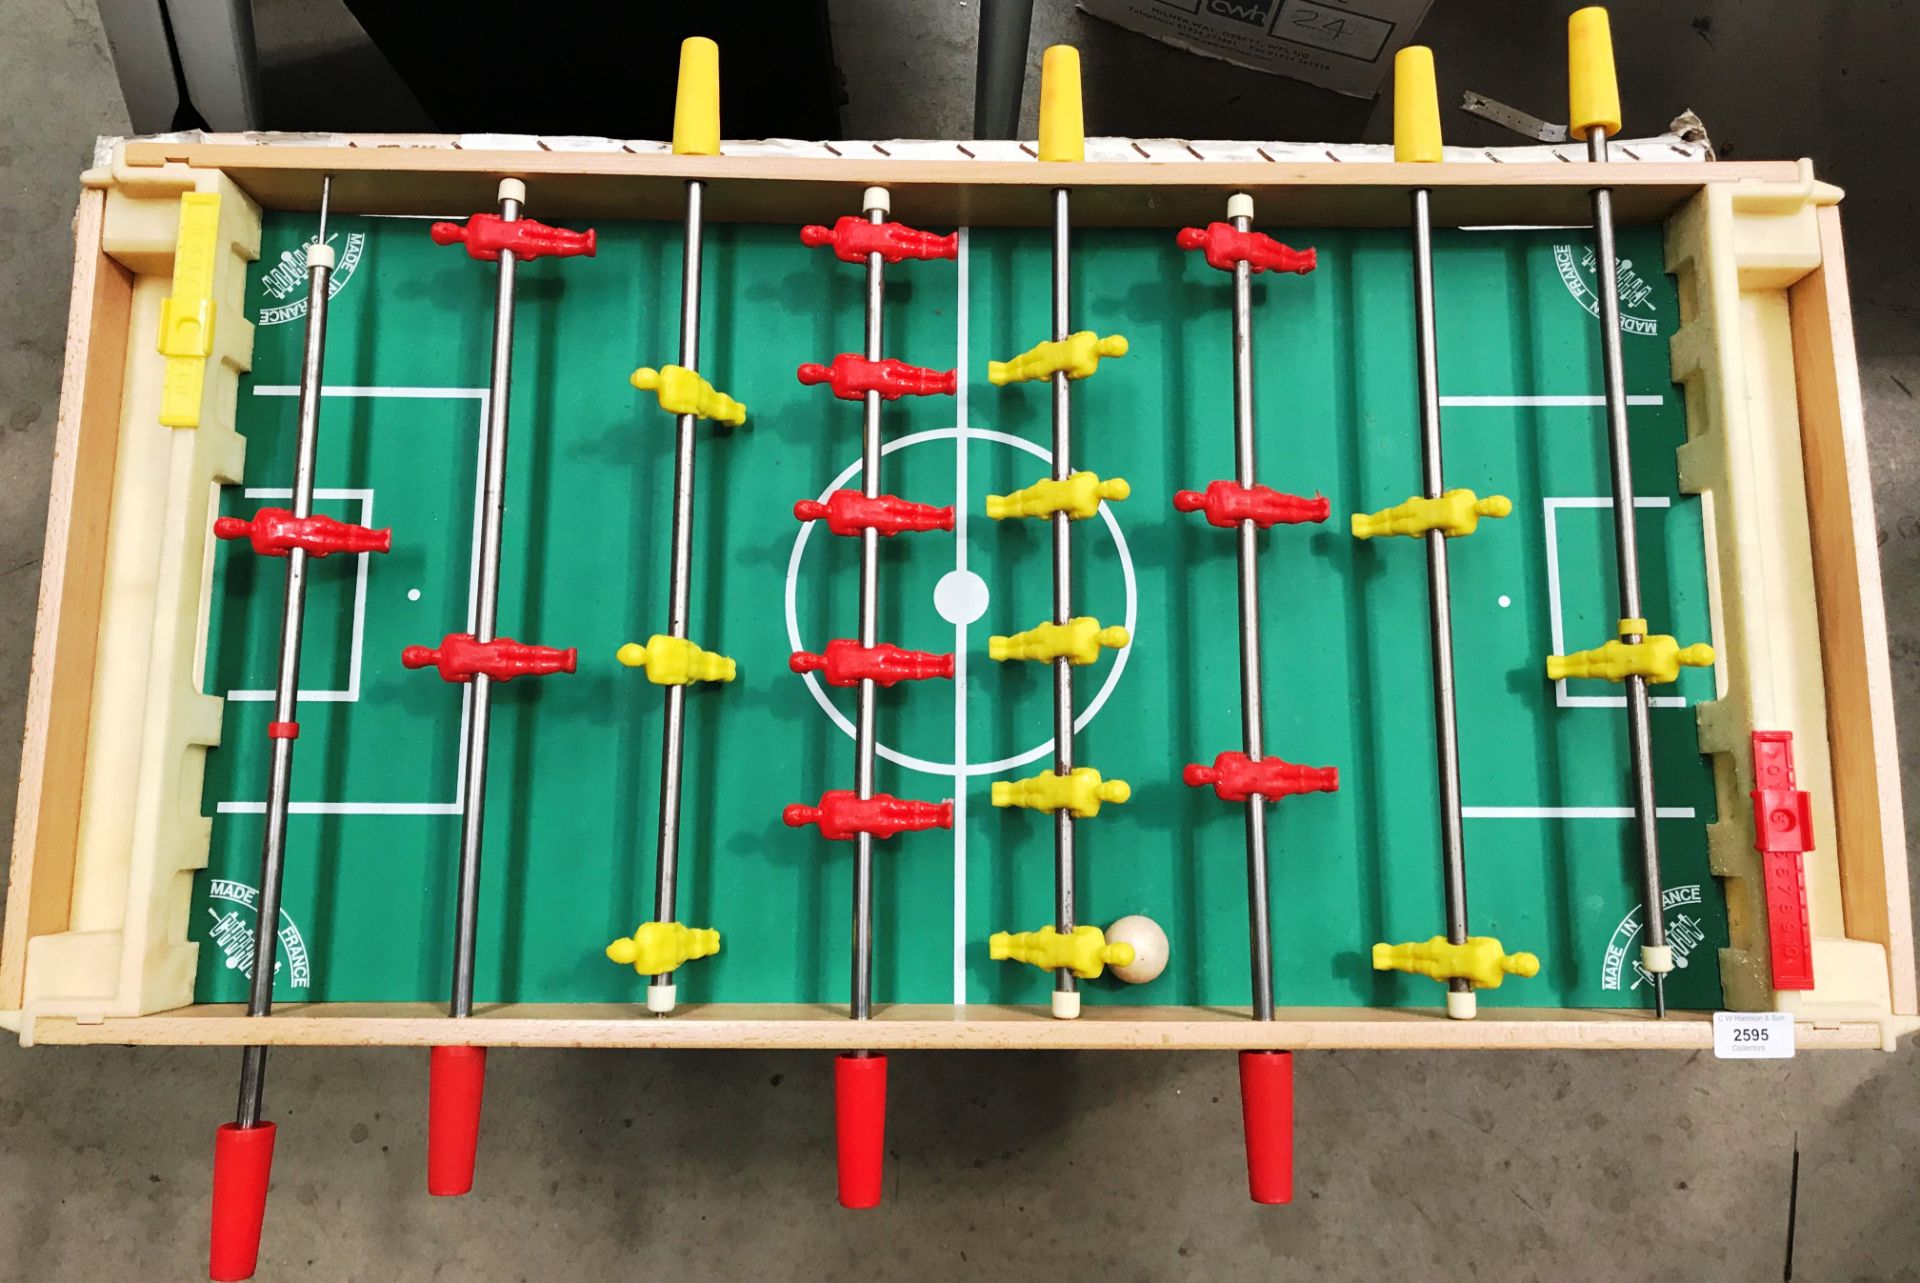 A Charton Super Jouet table football game on legs - in play worn box - Image 2 of 3